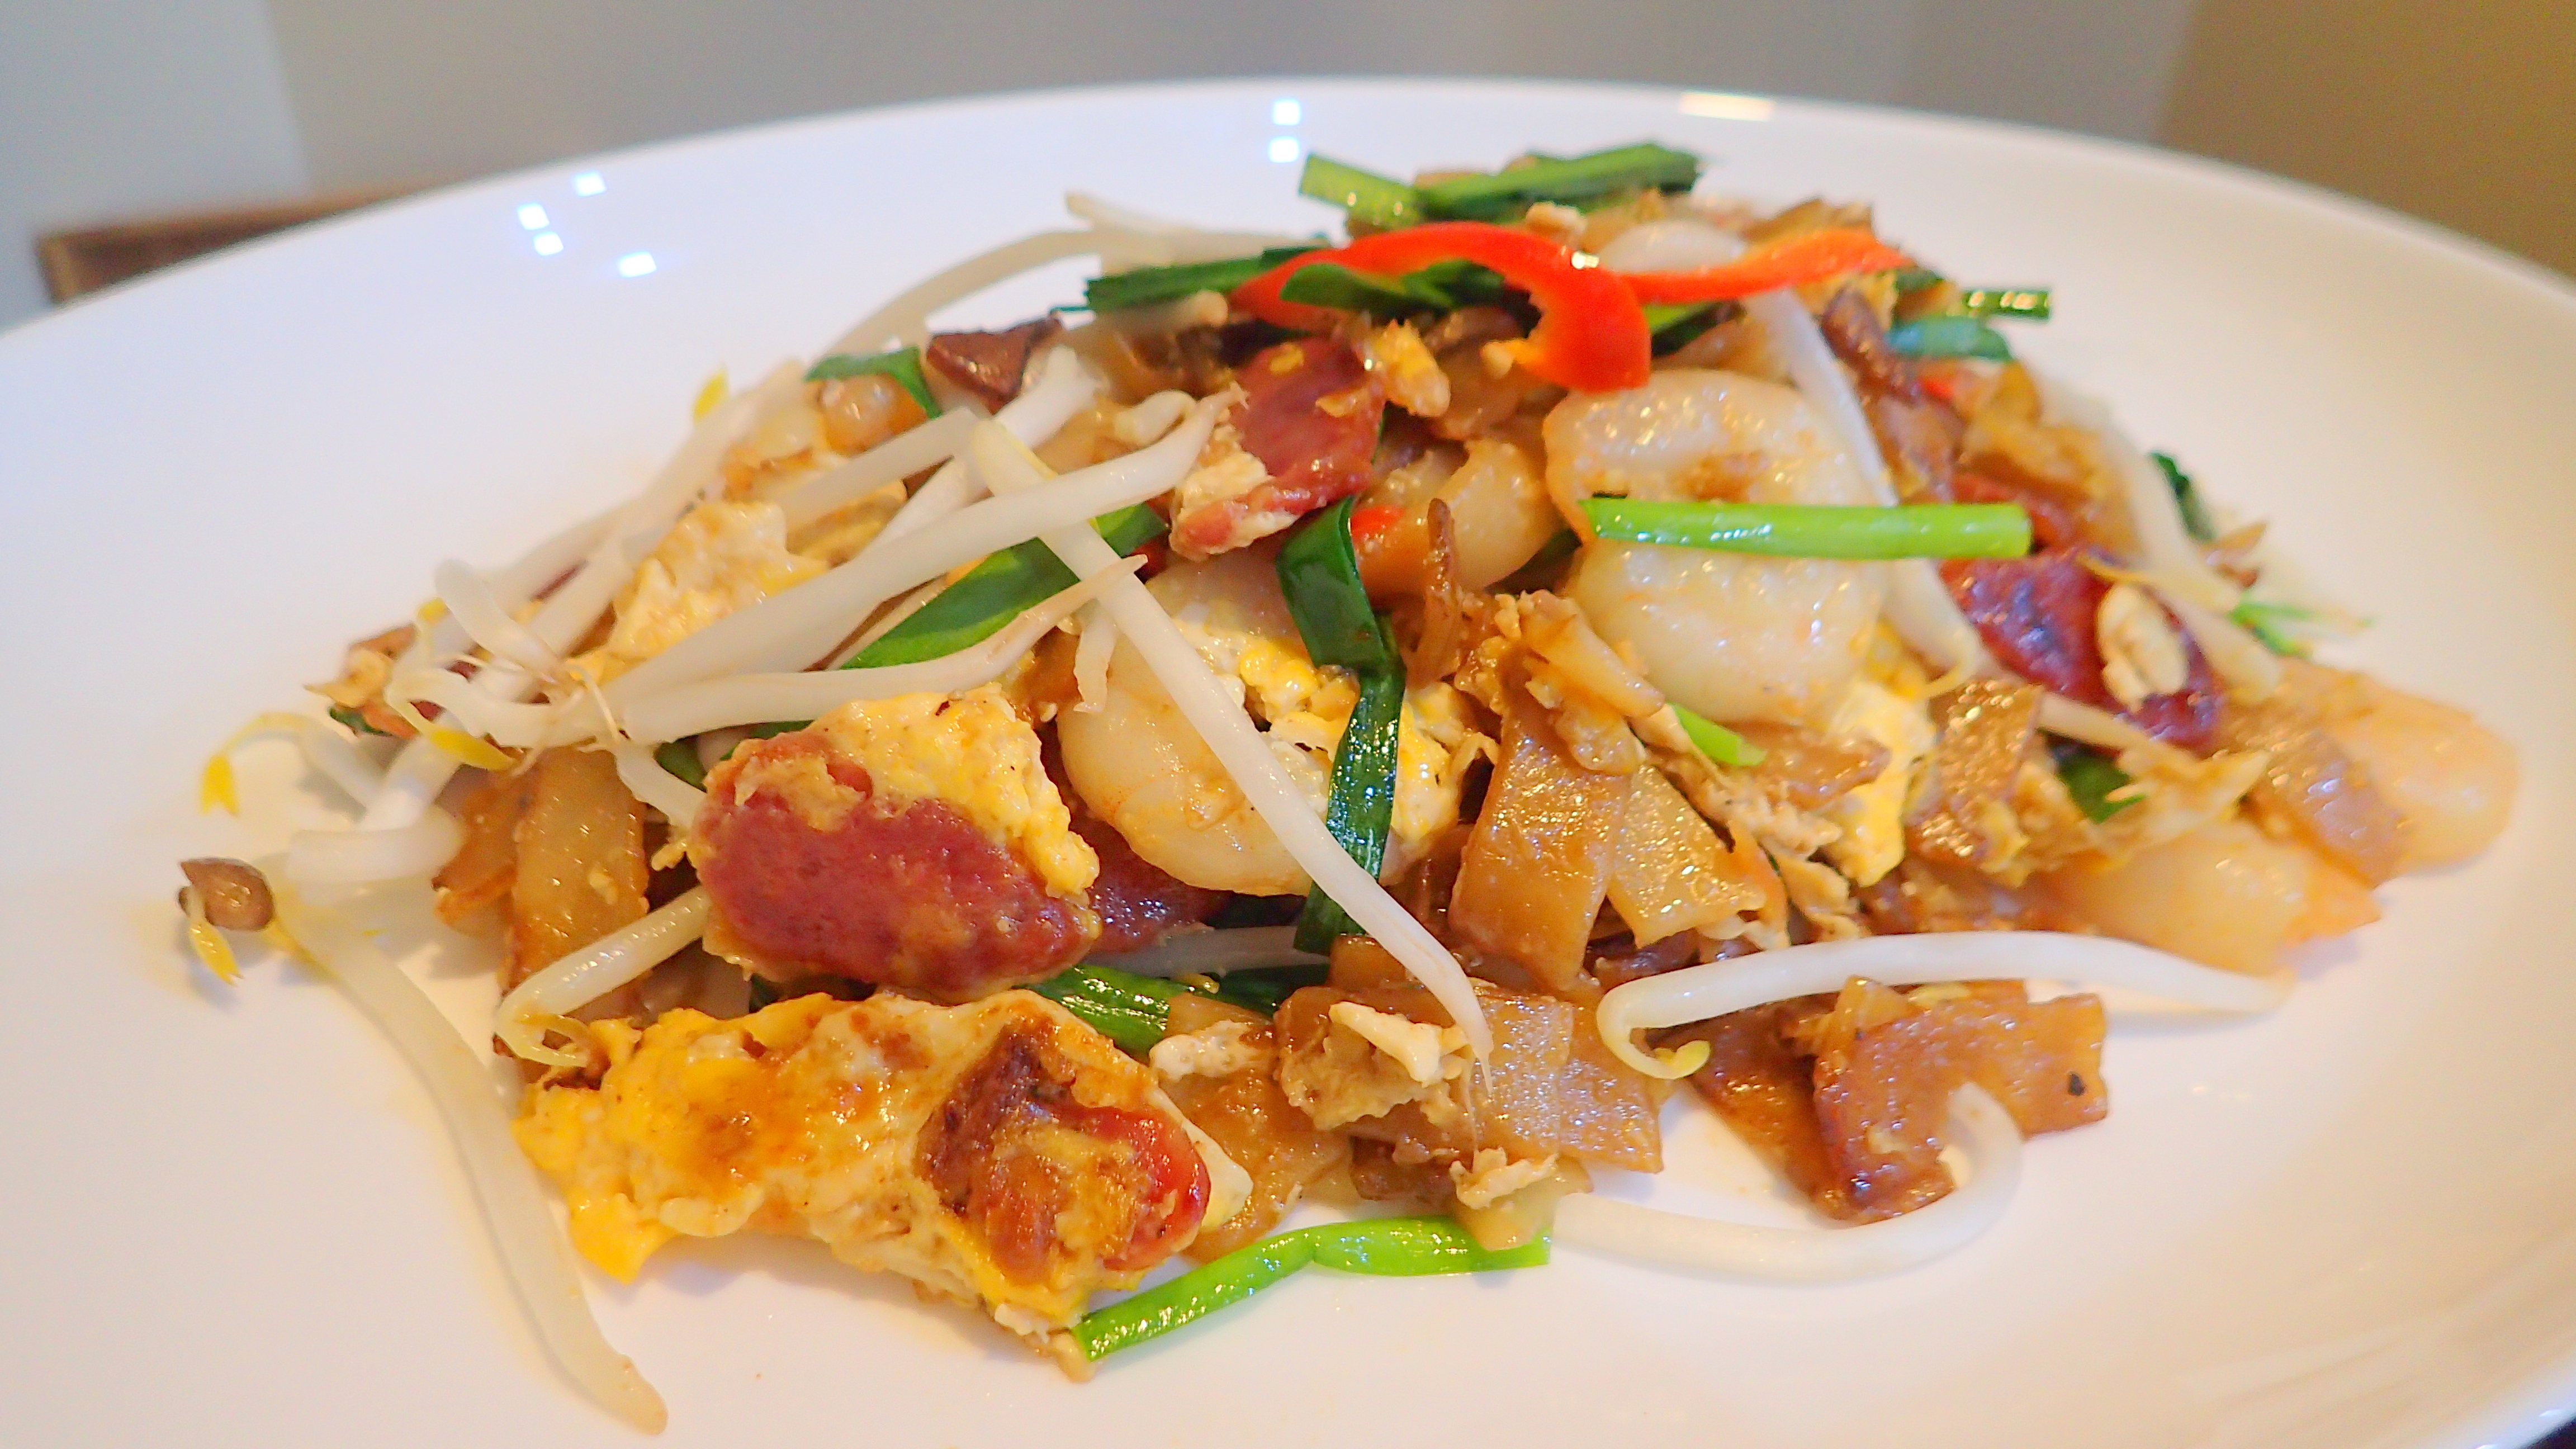 Char Keow Teow (Fried Flat Rice Noodles)